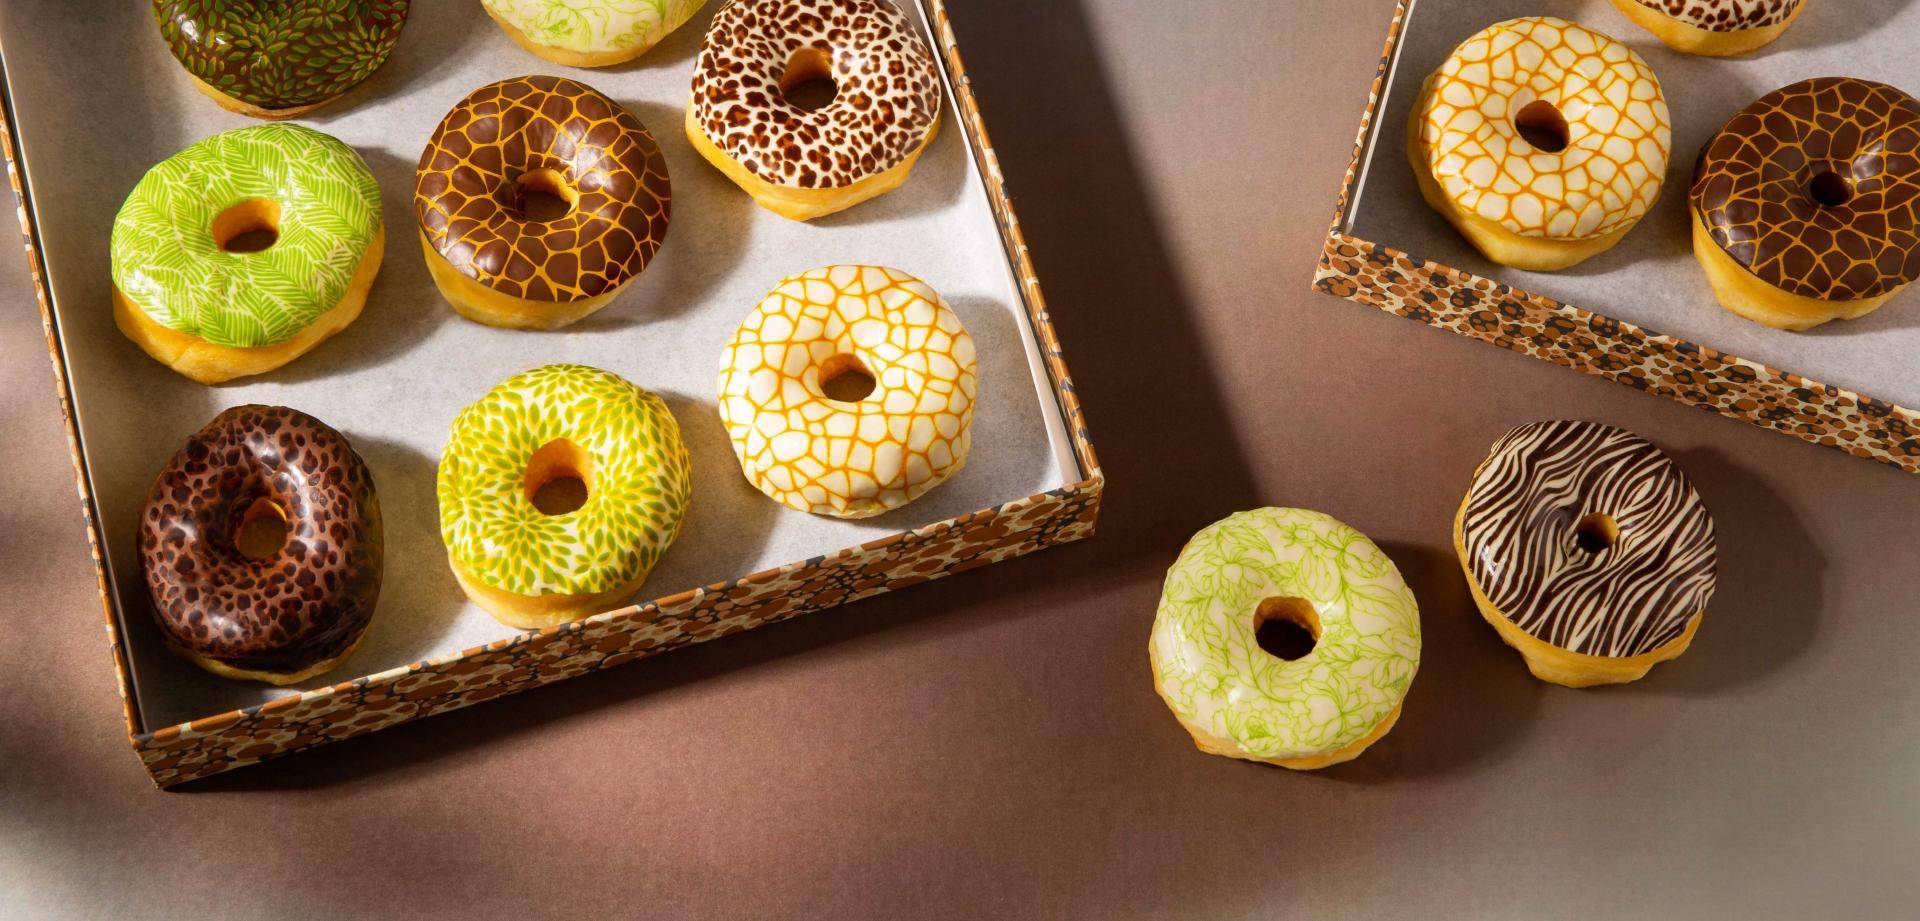 Donuts with printed glazing